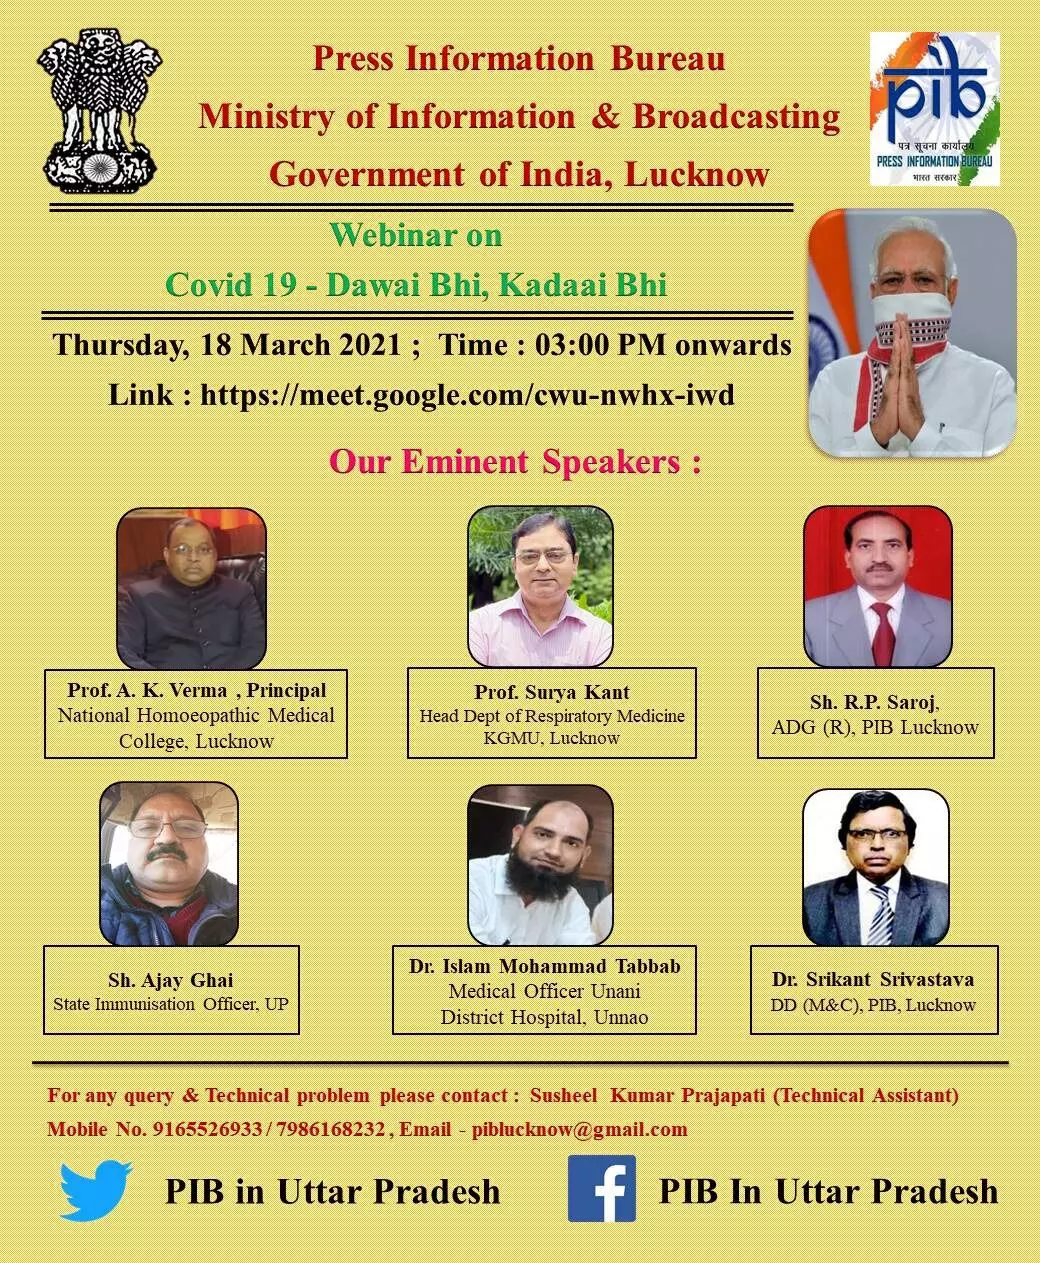 PIB regional office of Lucknow is going to organize a Webinar on Covid 19